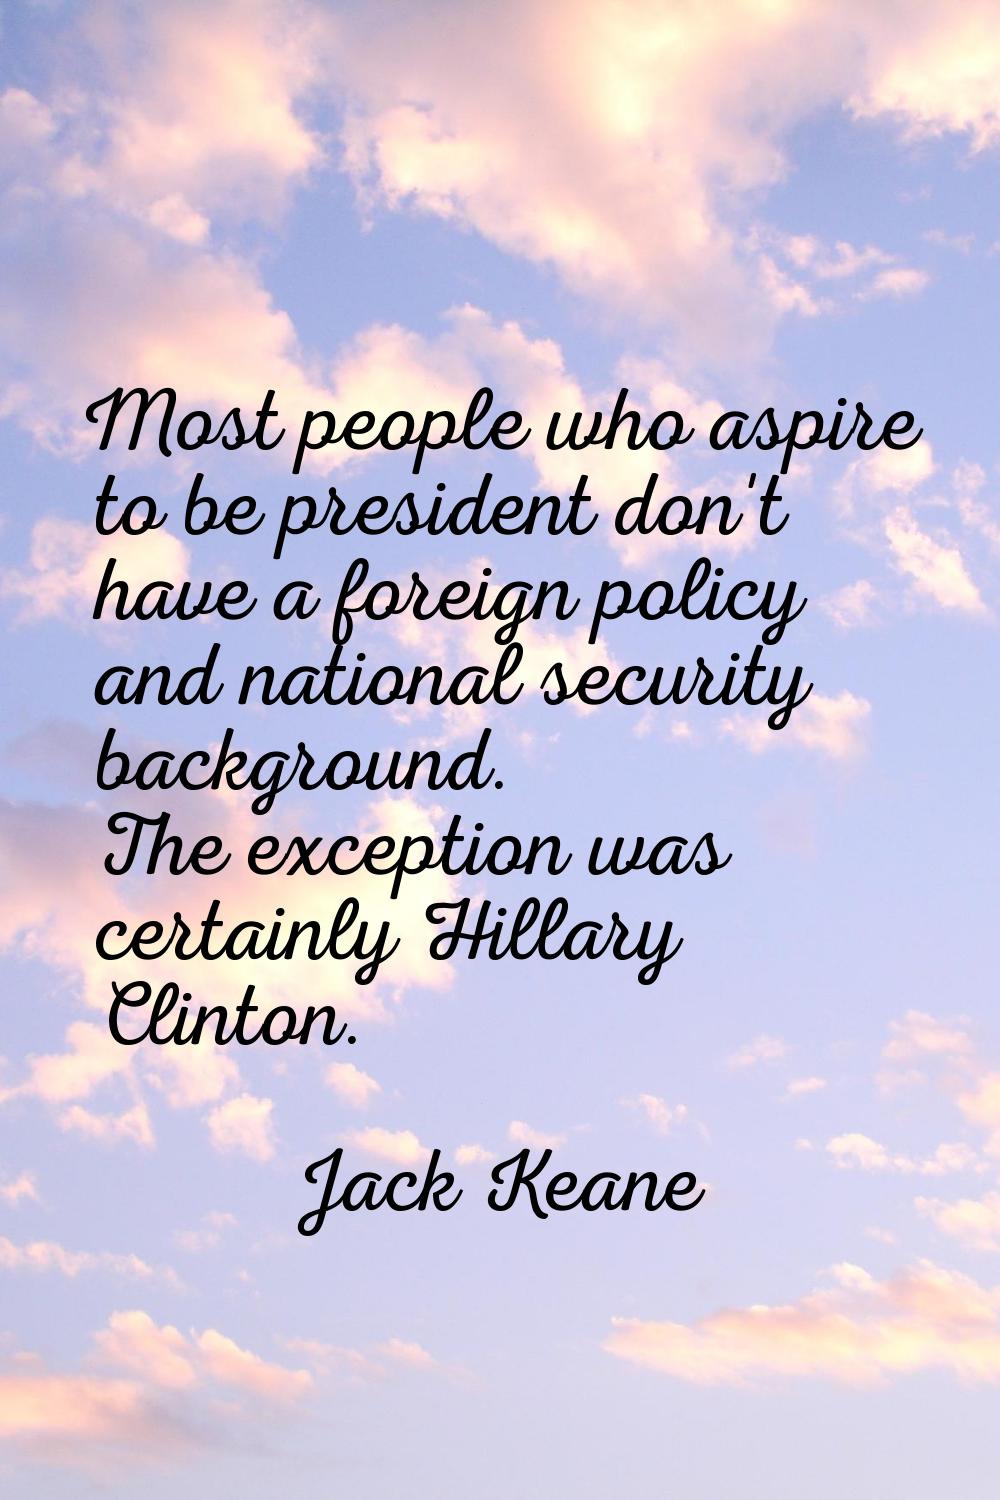 Most people who aspire to be president don't have a foreign policy and national security background